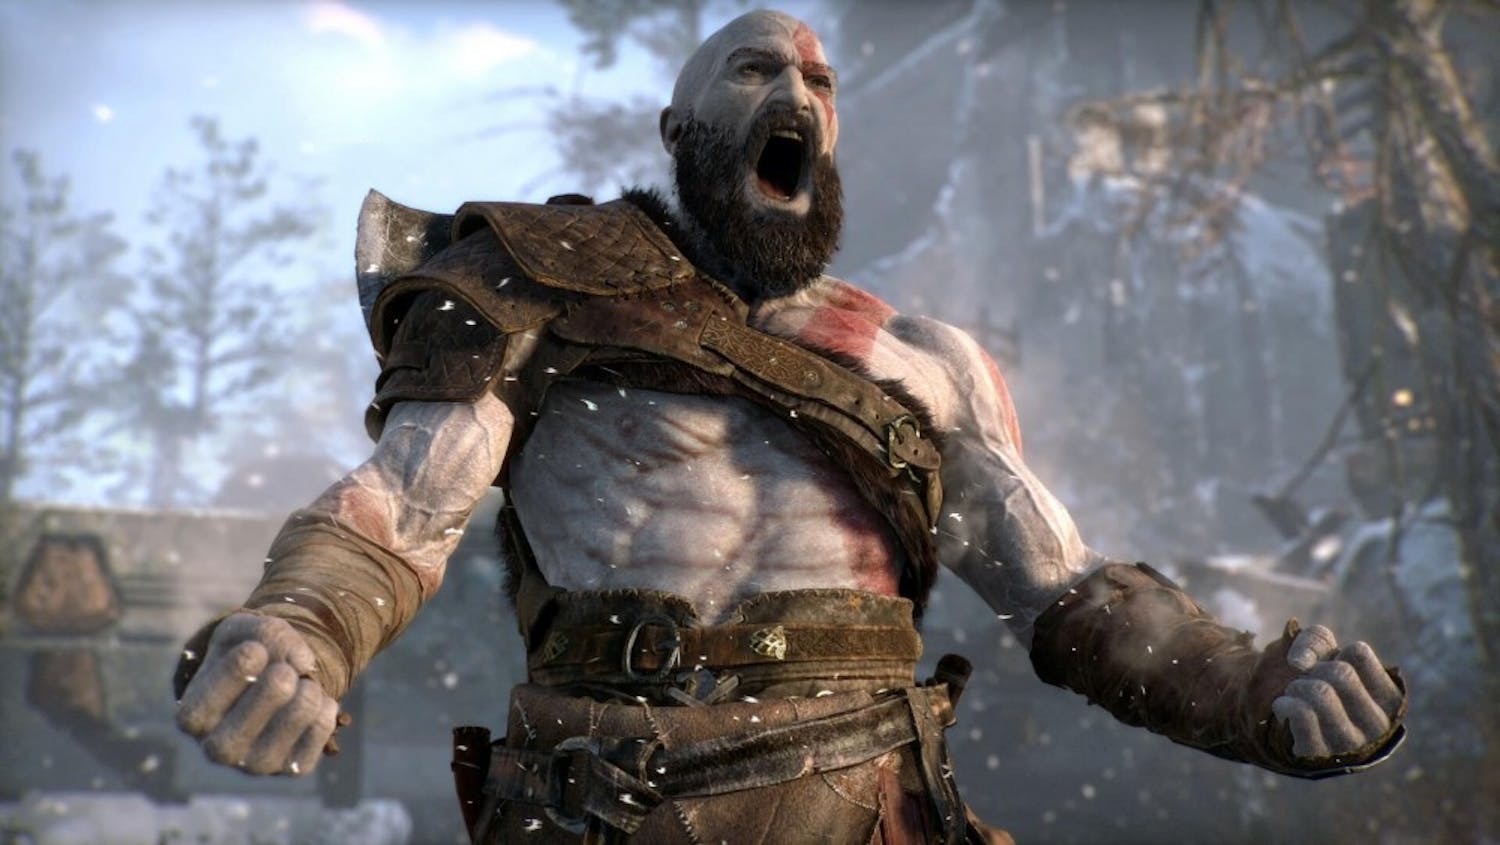 "God of War" is out now for PlayStation 4.